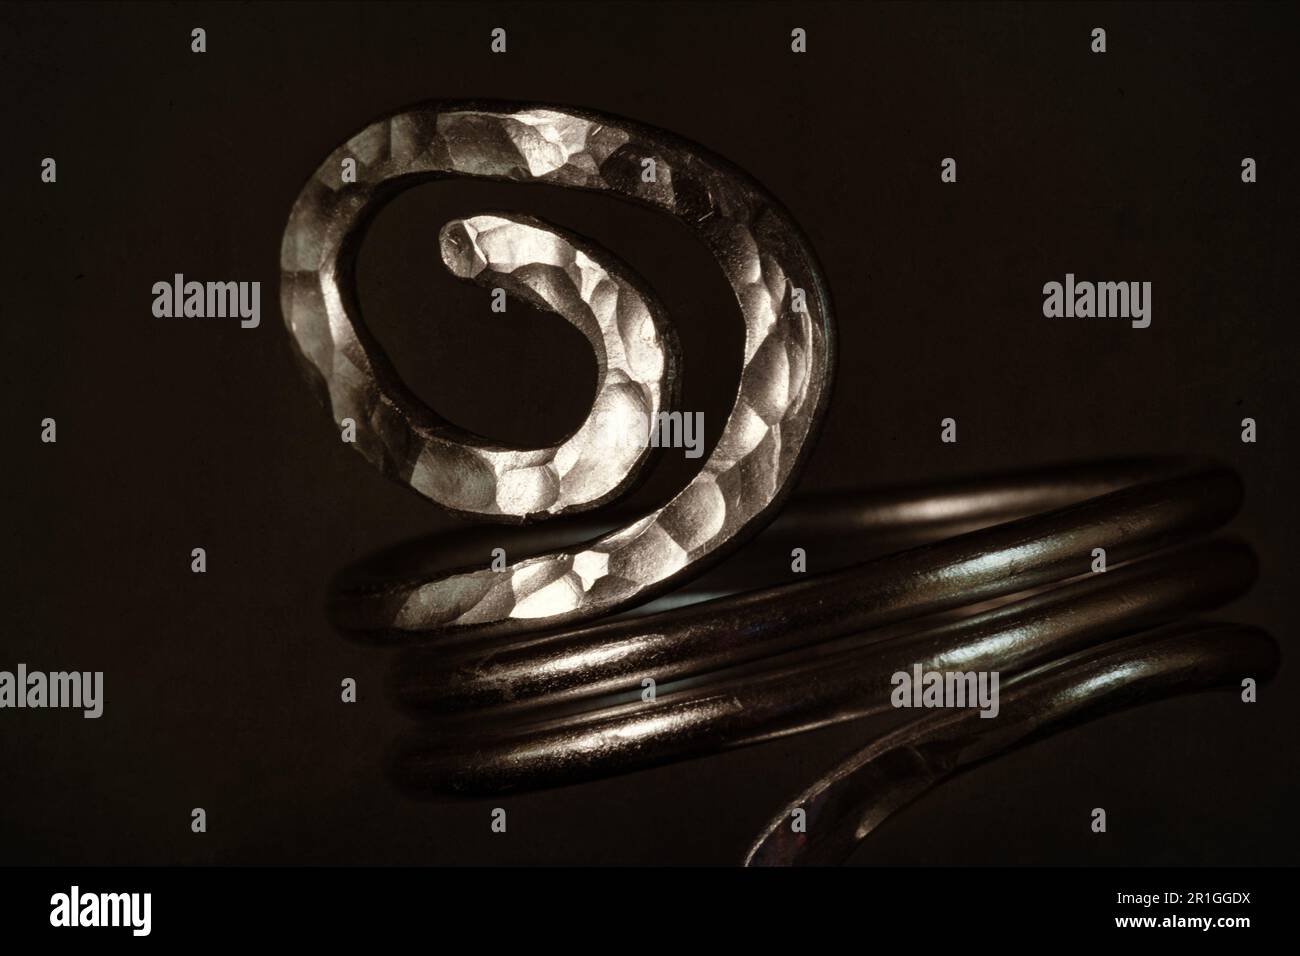 Close up of a home made metal wire ring, shaped into a spiral and worked to create texture. Stock Photo